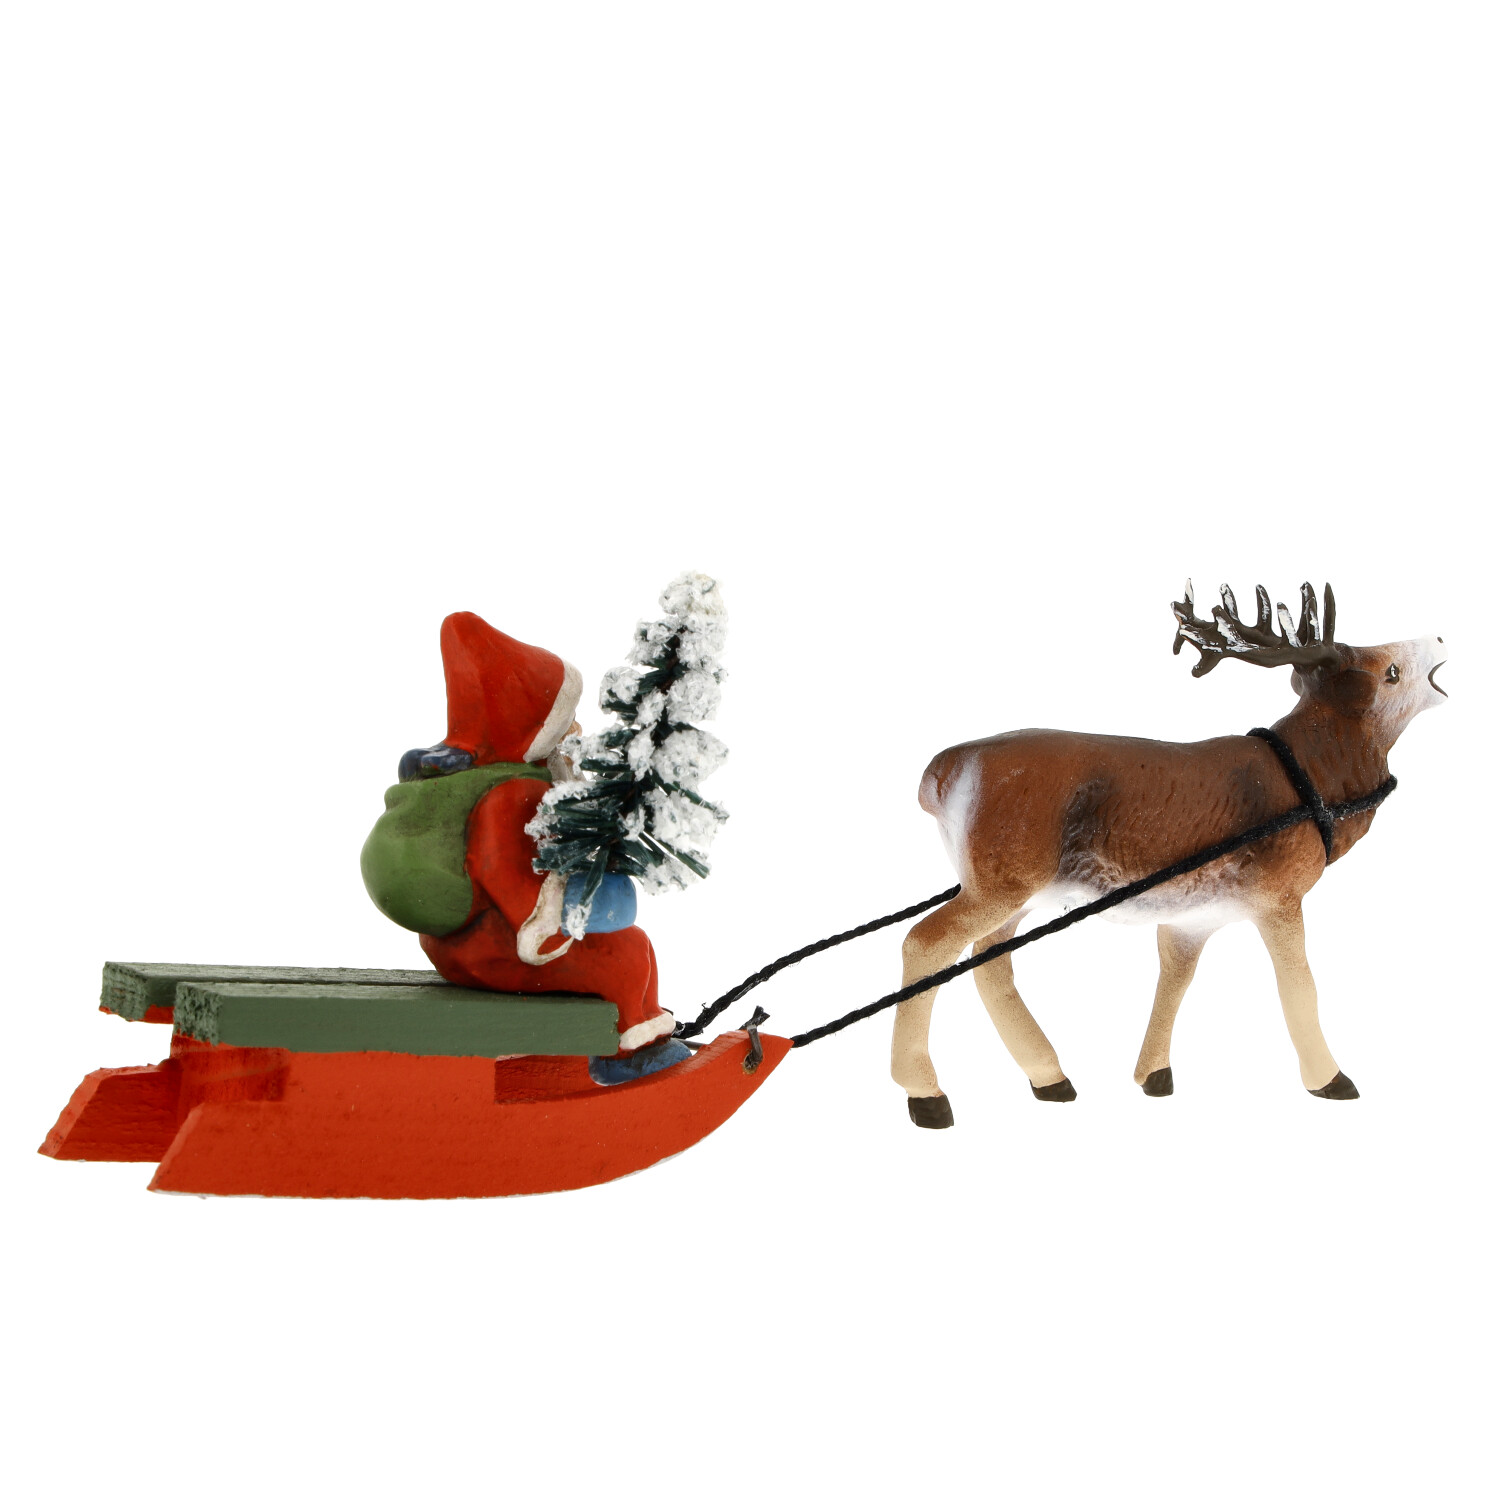 Miniatuer Santa with sled - Marolin Papermaché - made in Germany